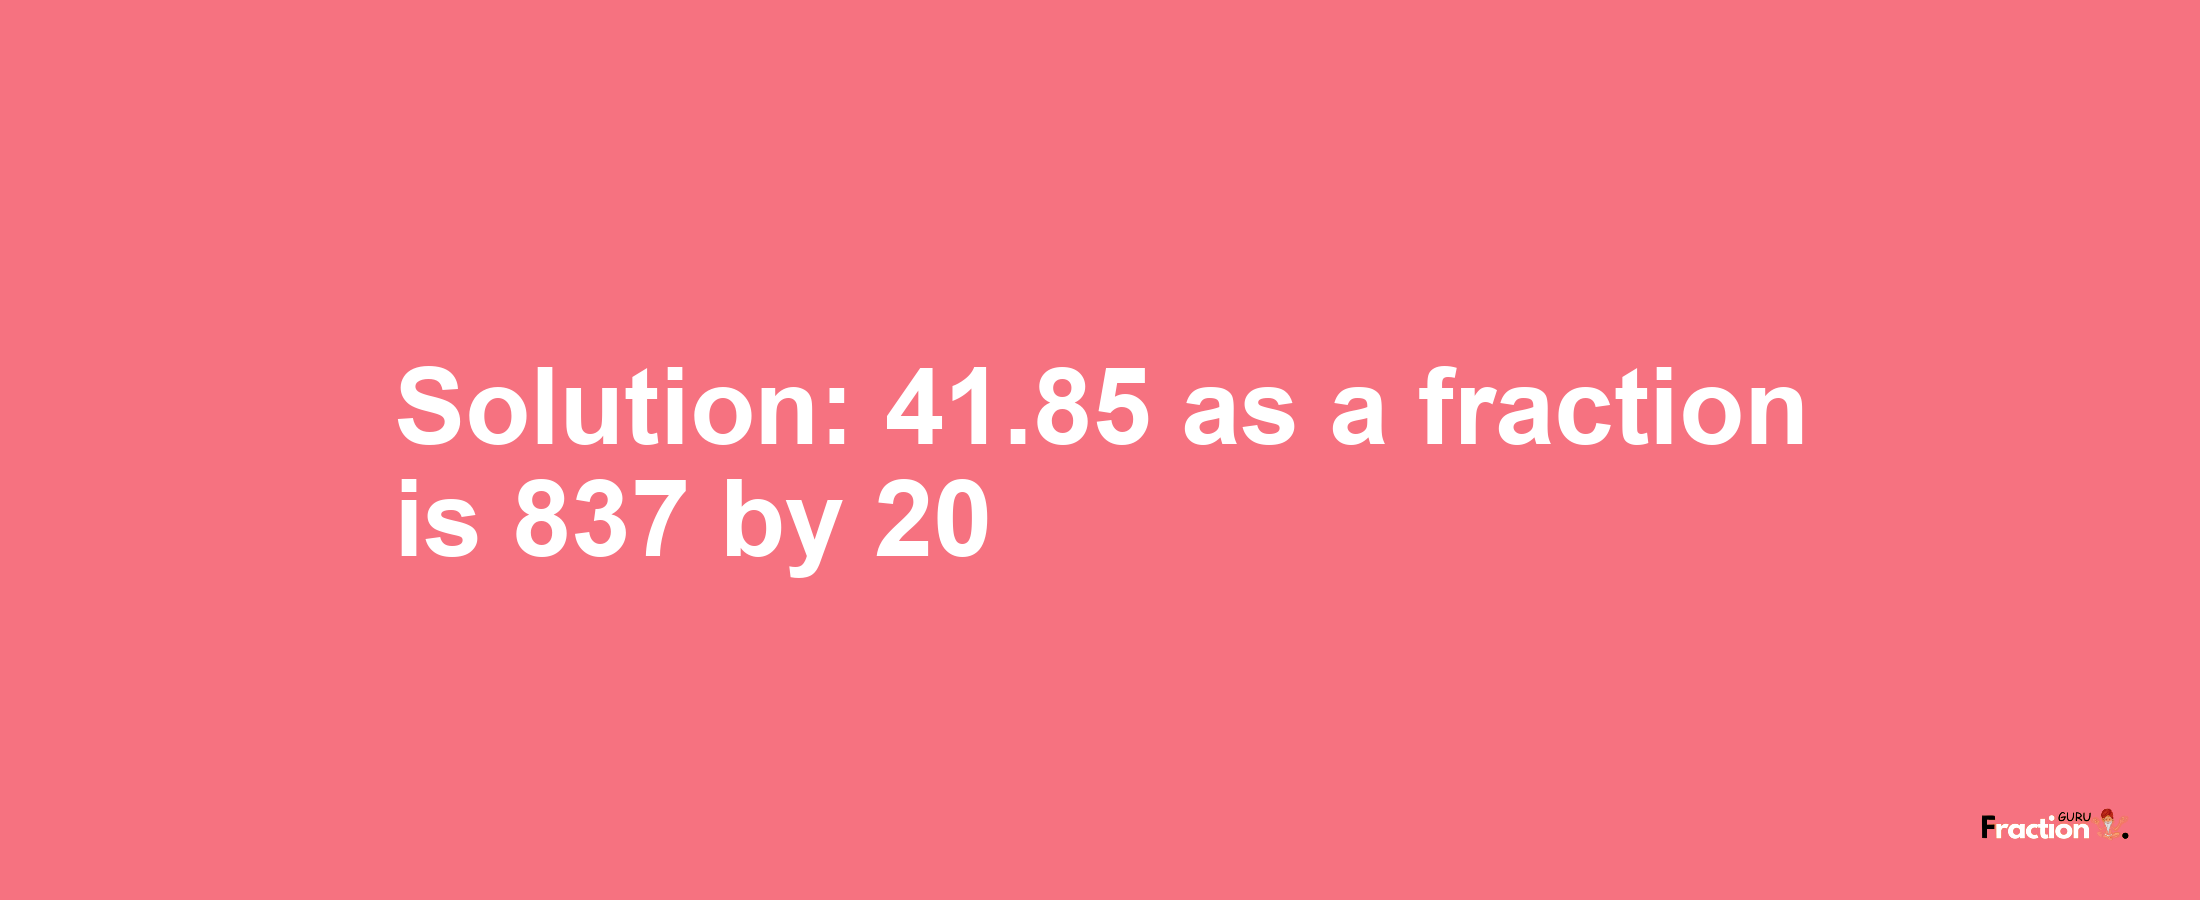 Solution:41.85 as a fraction is 837/20